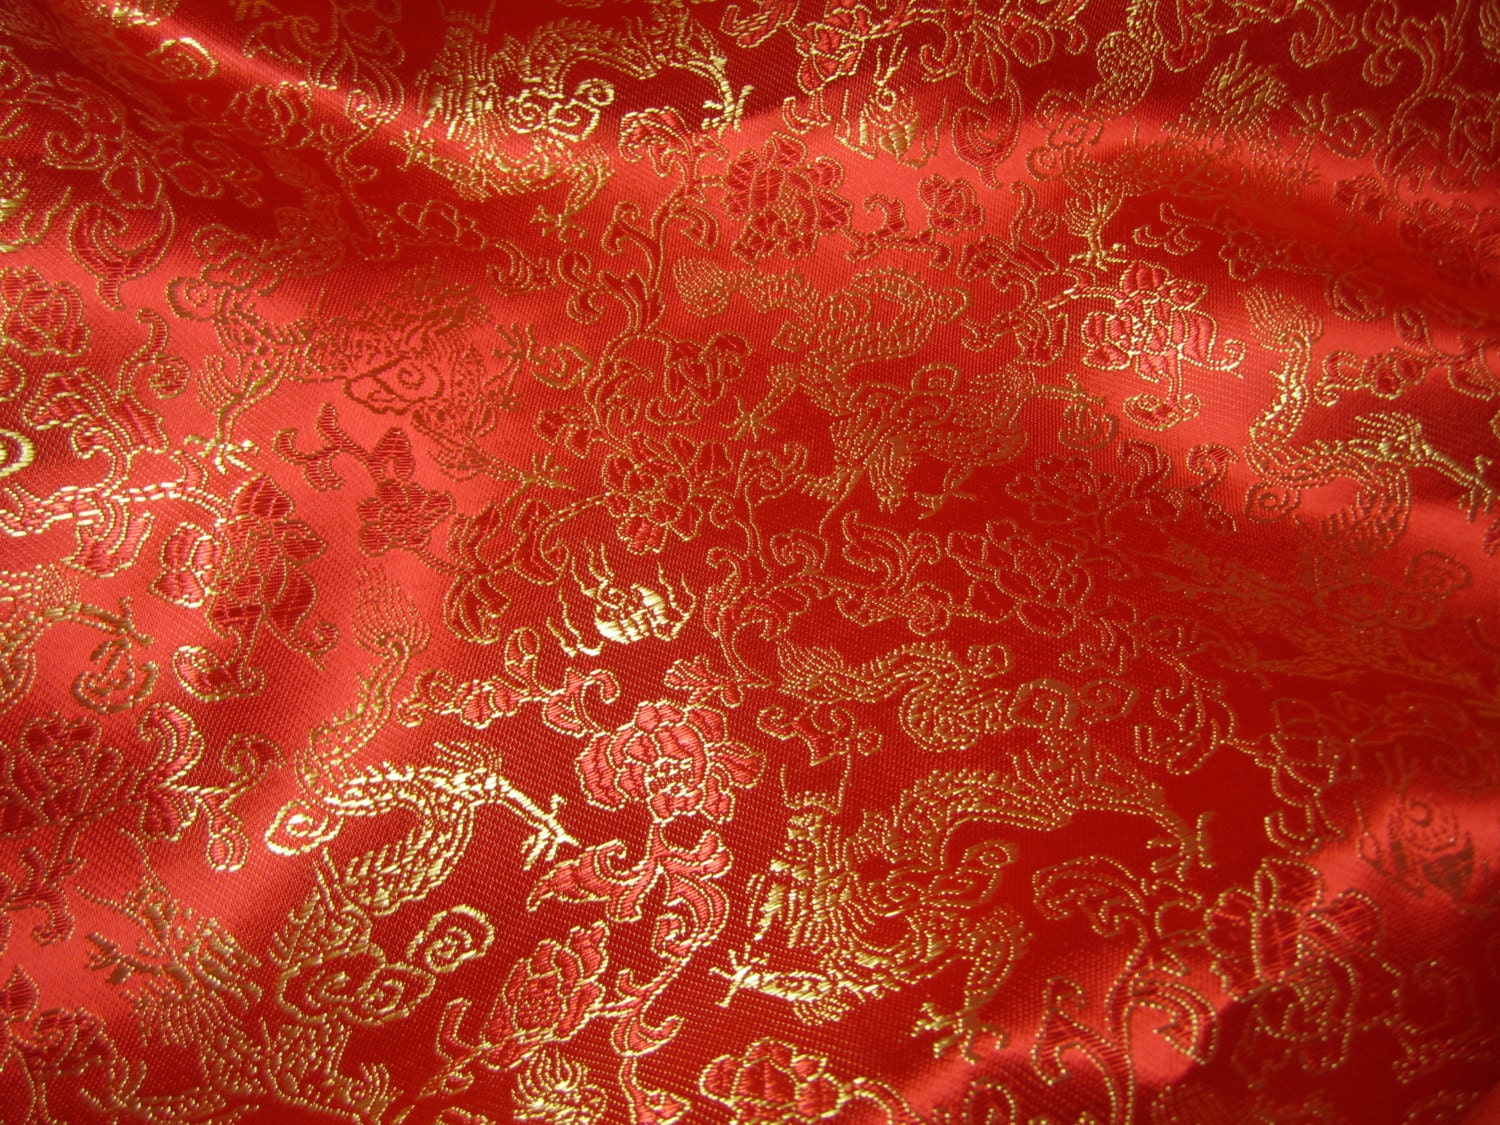 Chinese brocade fabric in bright red with golden by TintinBeads